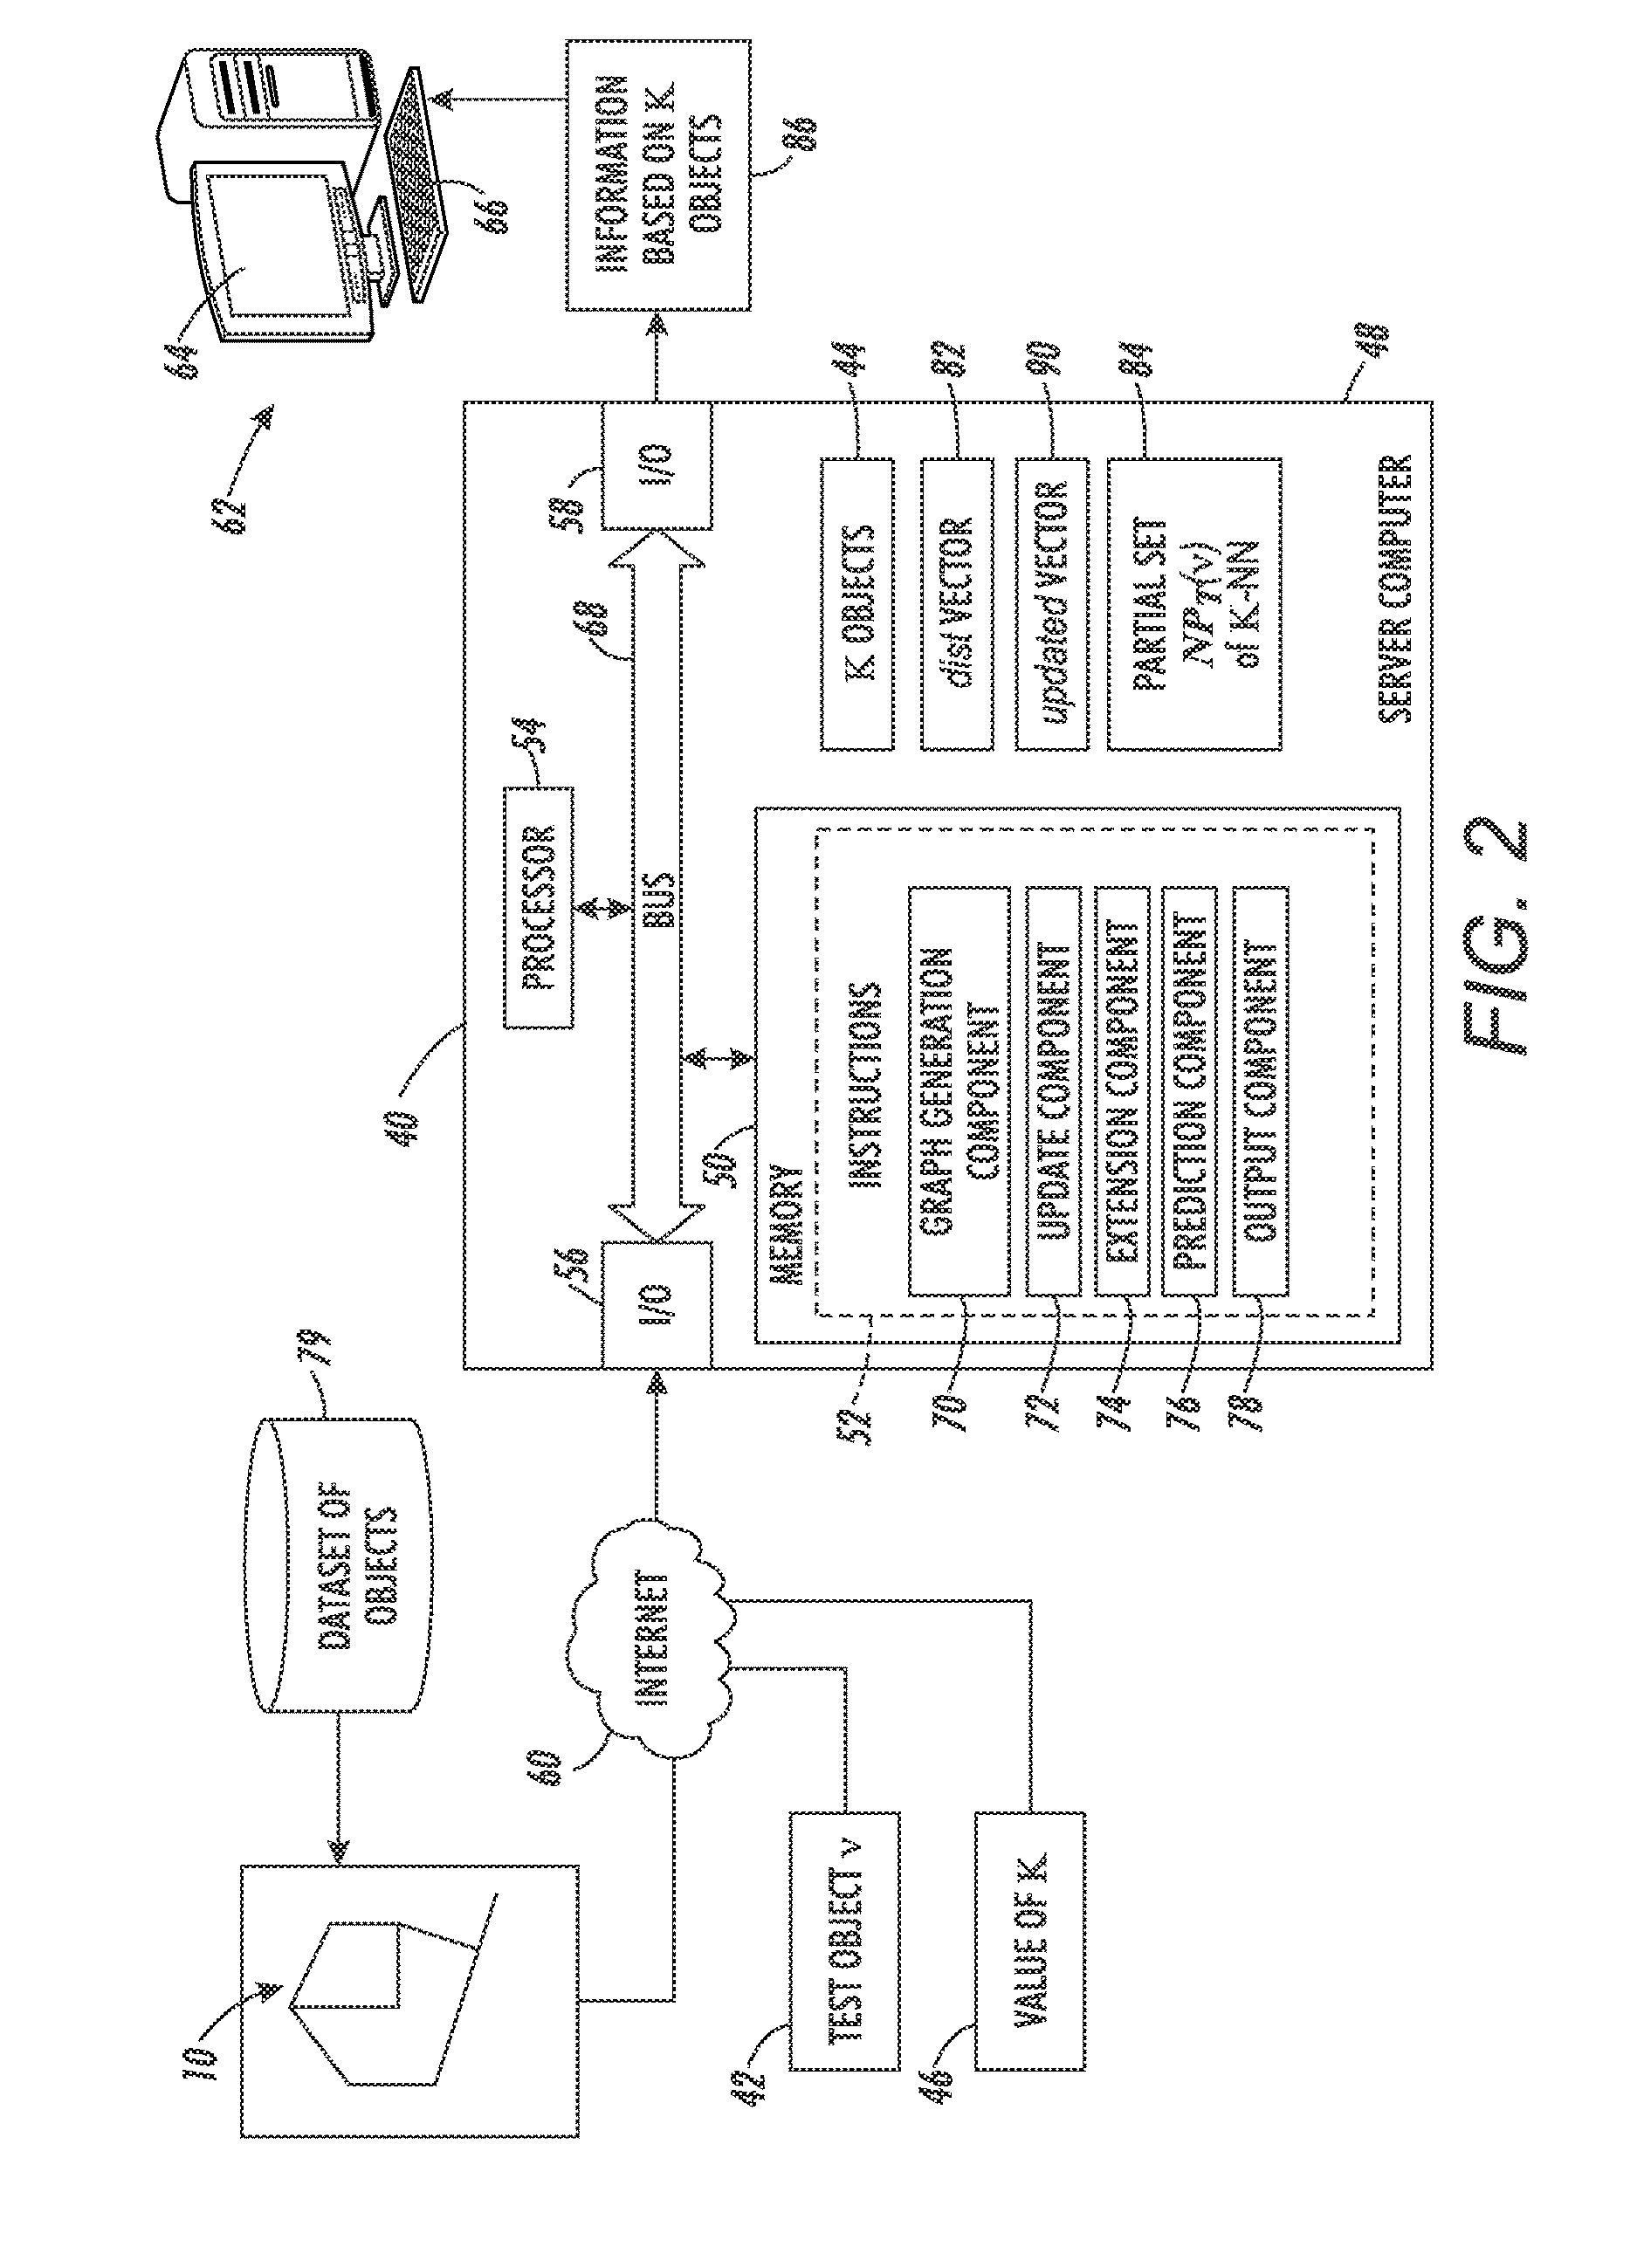 System and method for performing k-nearest neighbor search based on minimax distance measure and efficient outlier detection